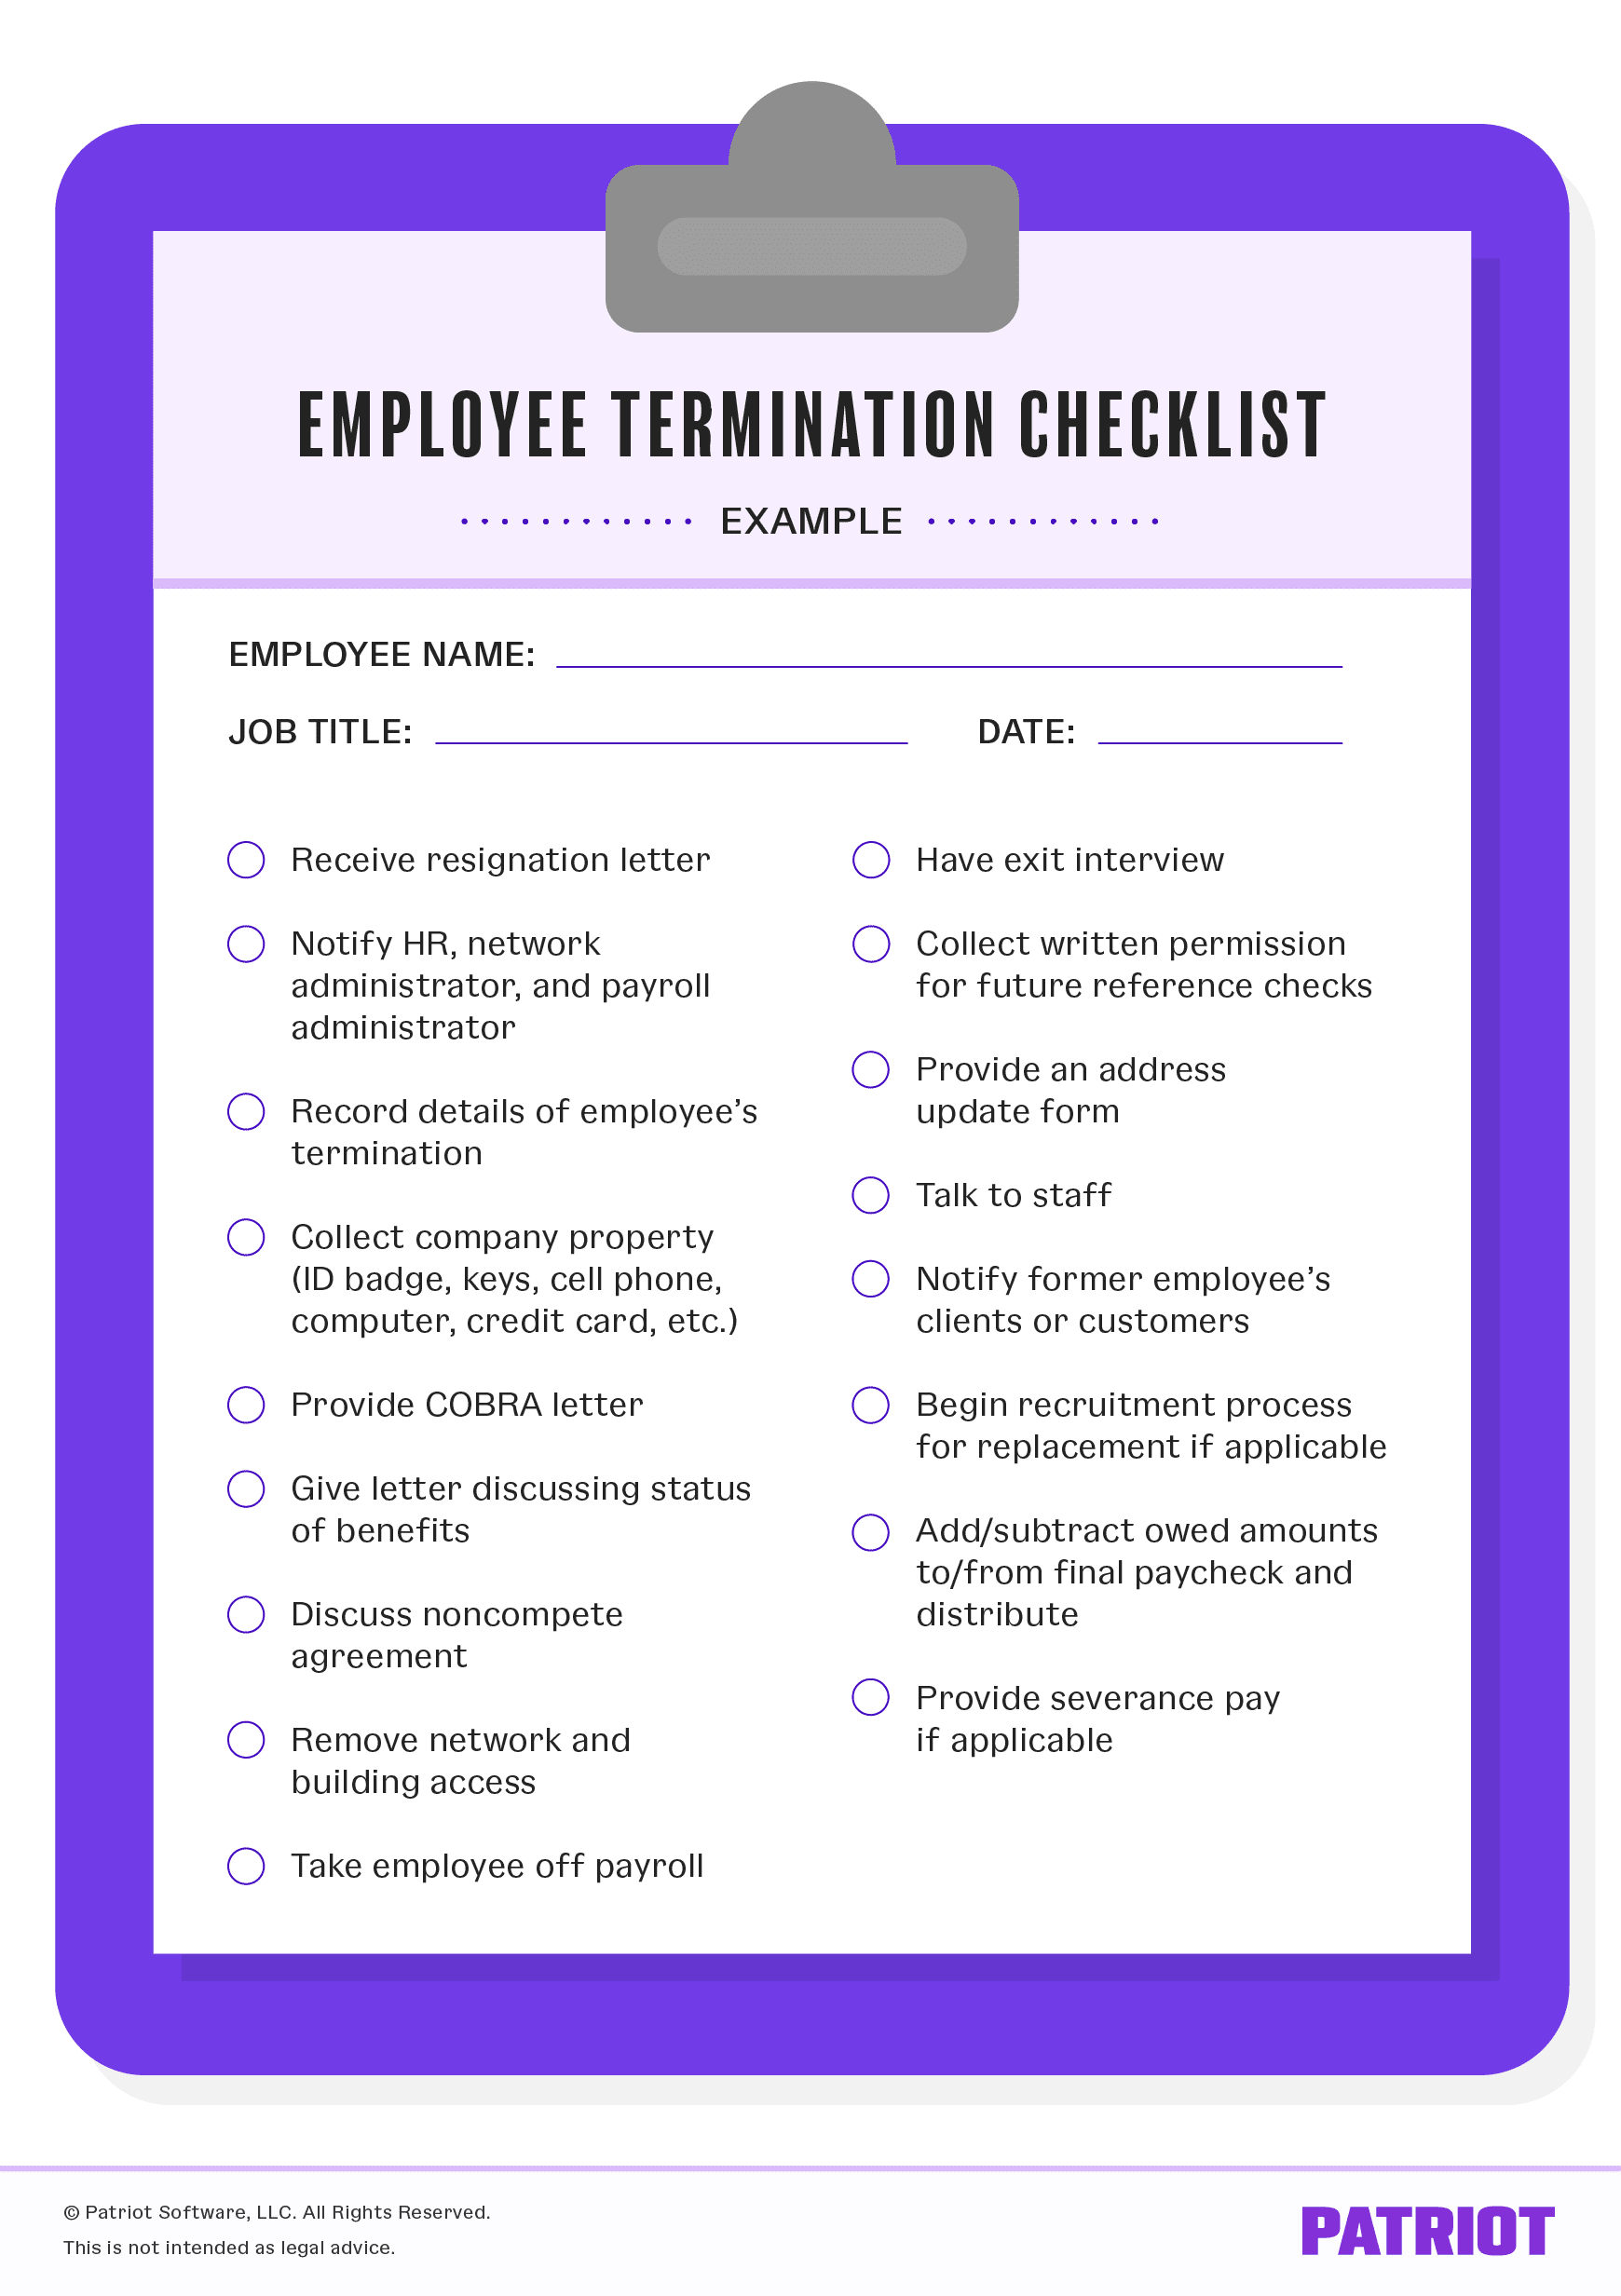 Employee Termination Checklist How To Stay Compliant Professional